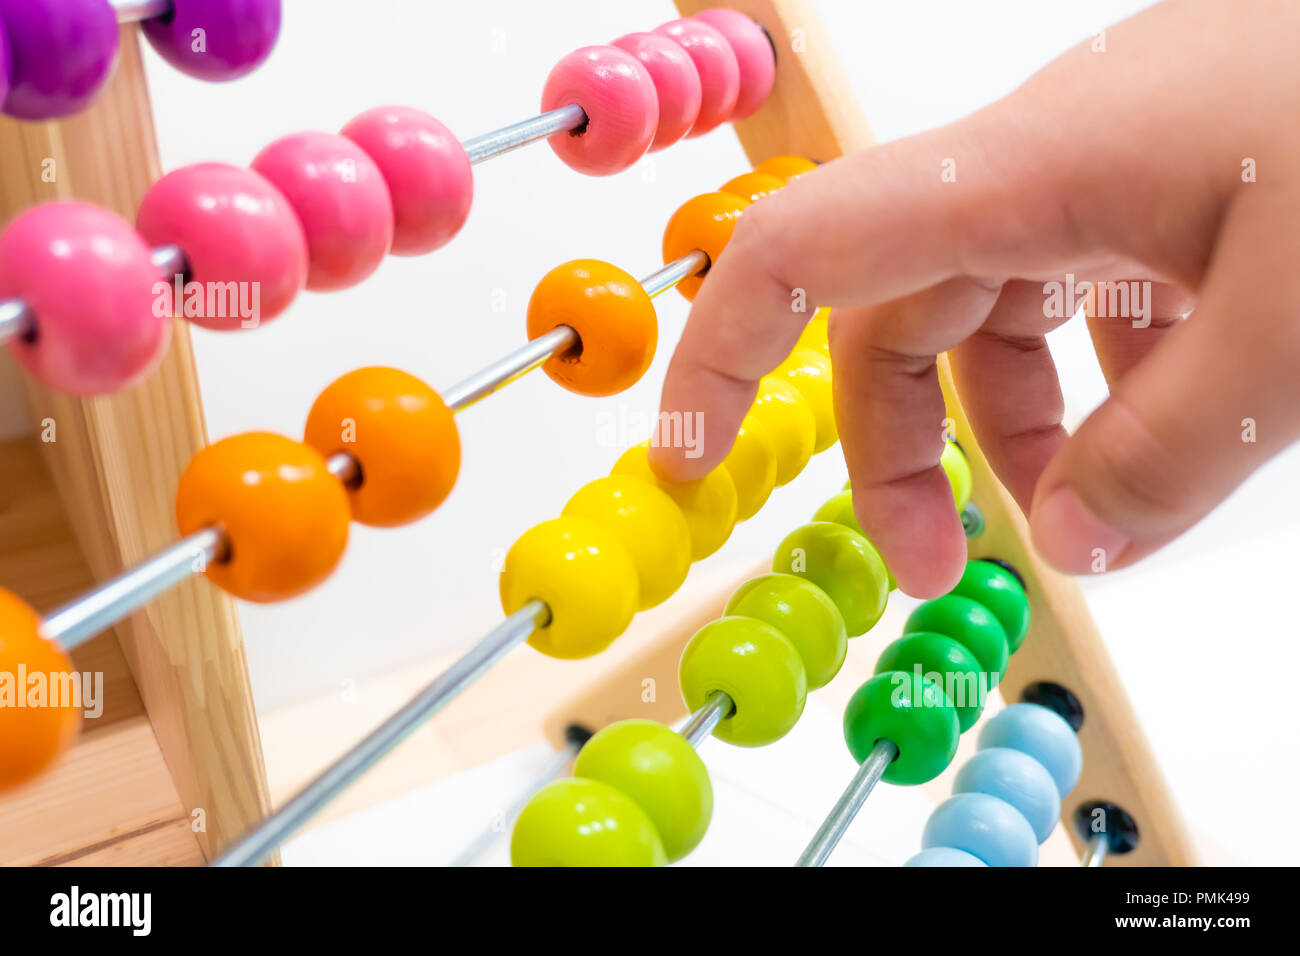 colorful abacus children toy hand playing for practice math and calculation learning for kids. Stock Photo